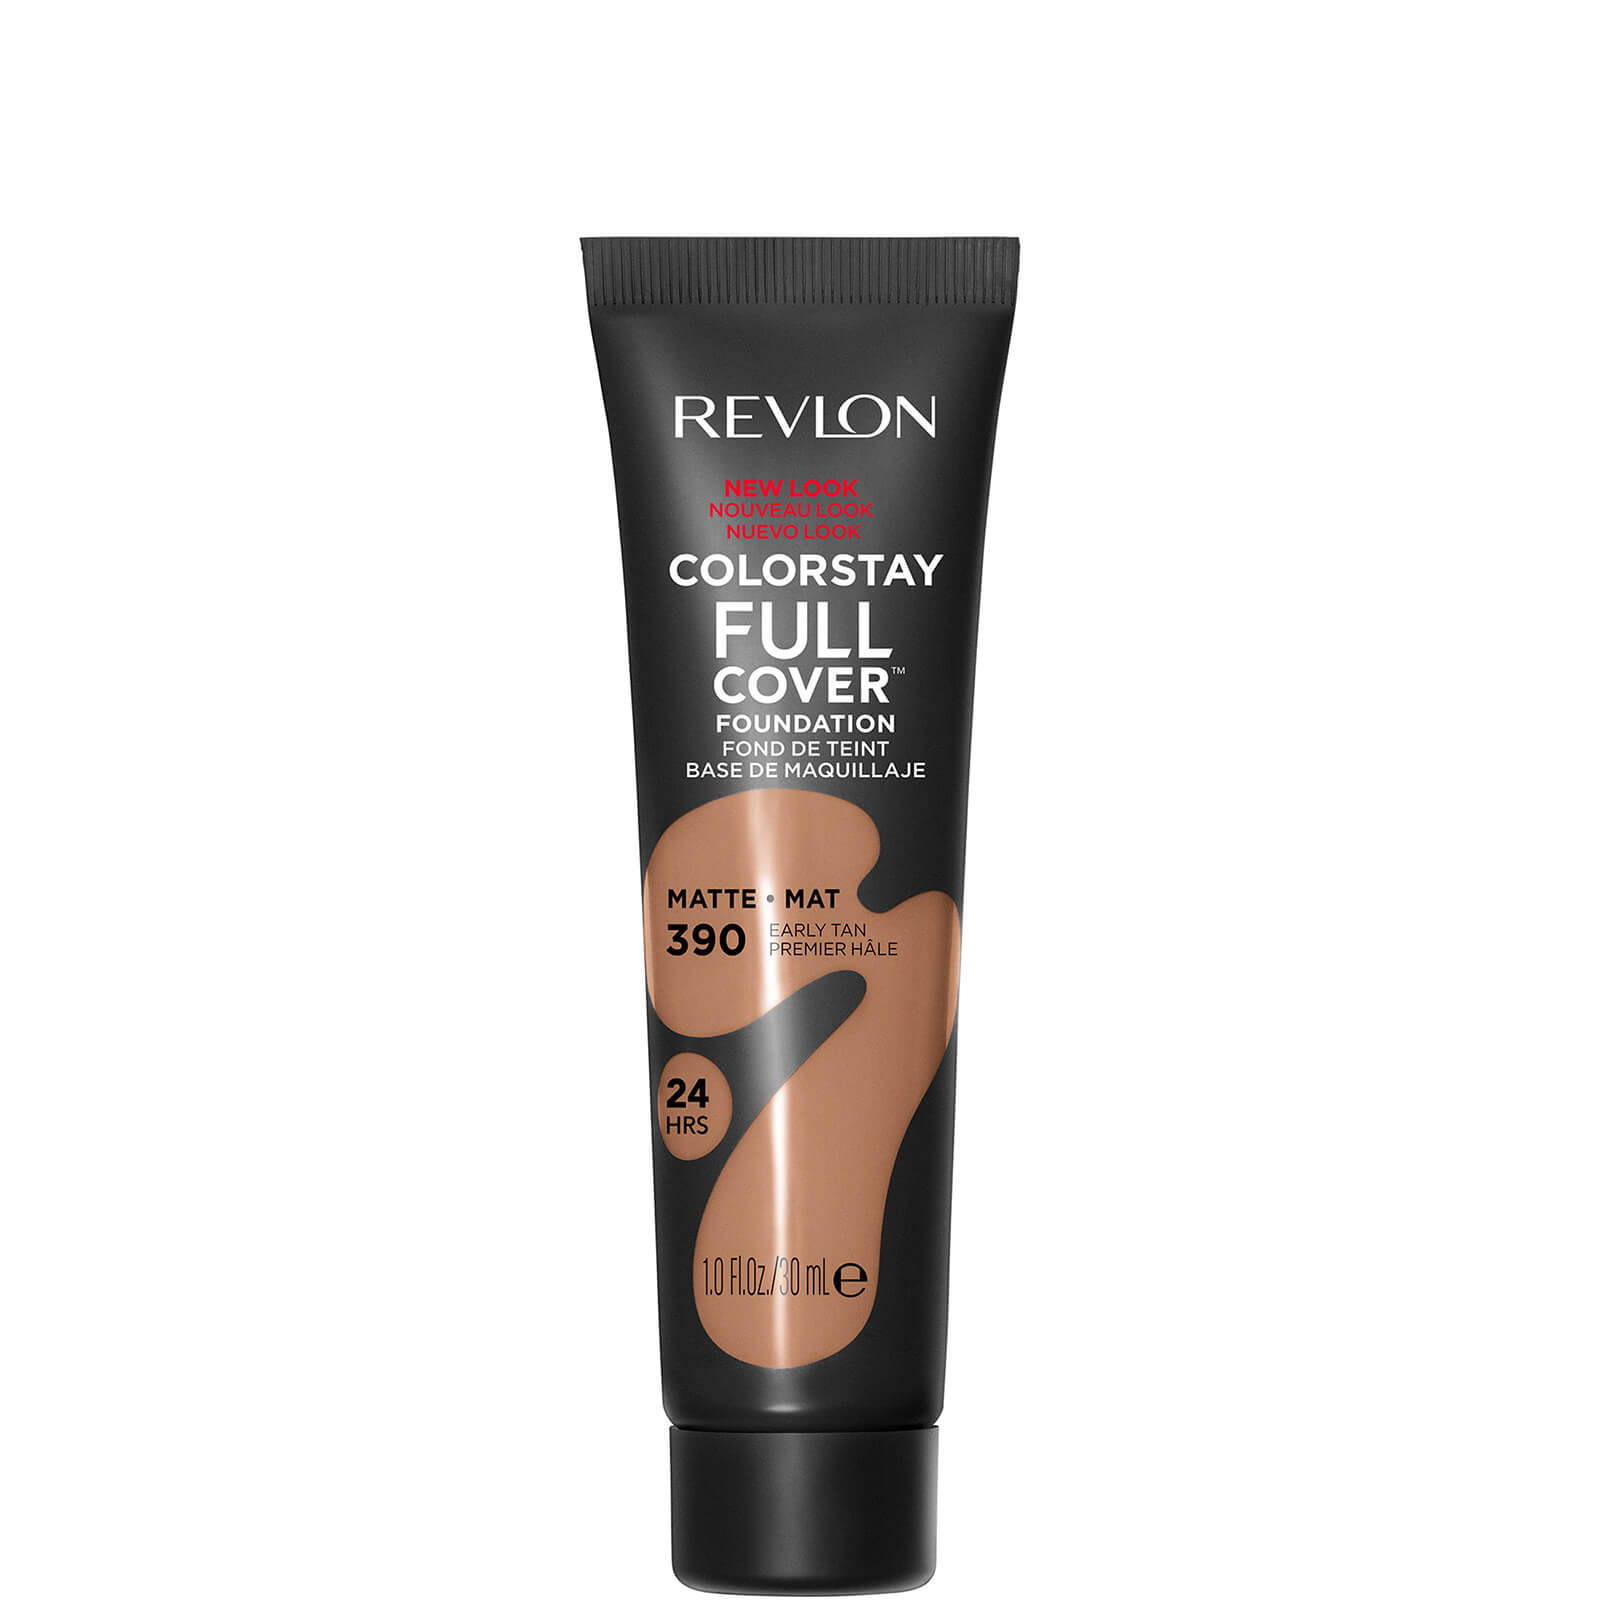 Revlon Colorstay Full Cover Foundation 31g (Various Shades) - Early Tan